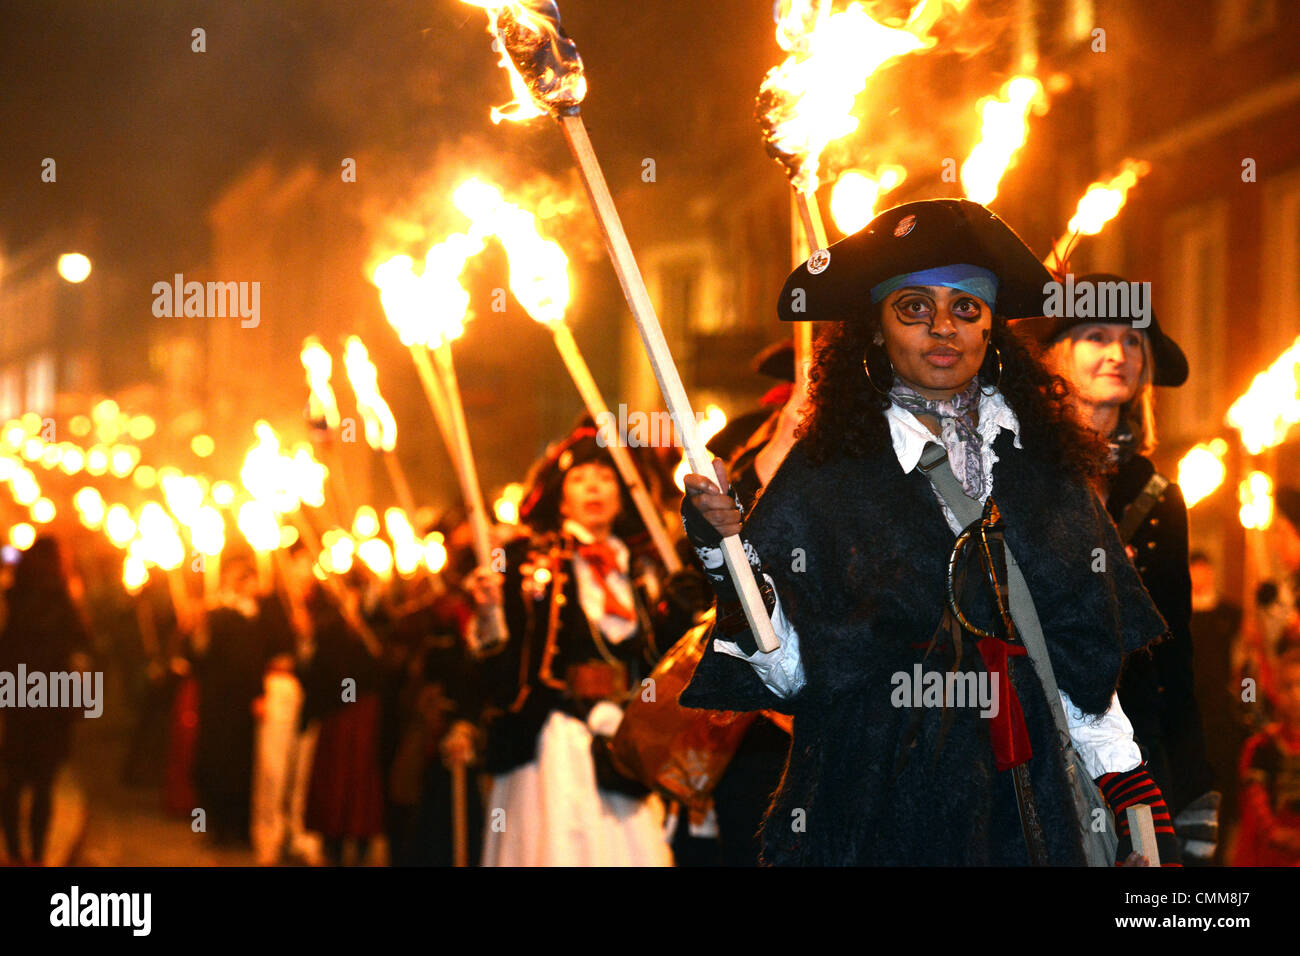 Lewes, East Sussex, UK. 5th Nov, 2013.  Torchlight procession through the streets of Lewes. Lewes bonfire night procession to celebrate the foiling of the 'Gunpowder plot' of 1605 Lewes, East Sussex, UK 5th November 2013 "Credit: CP/Alamy Live News" Stock Photo